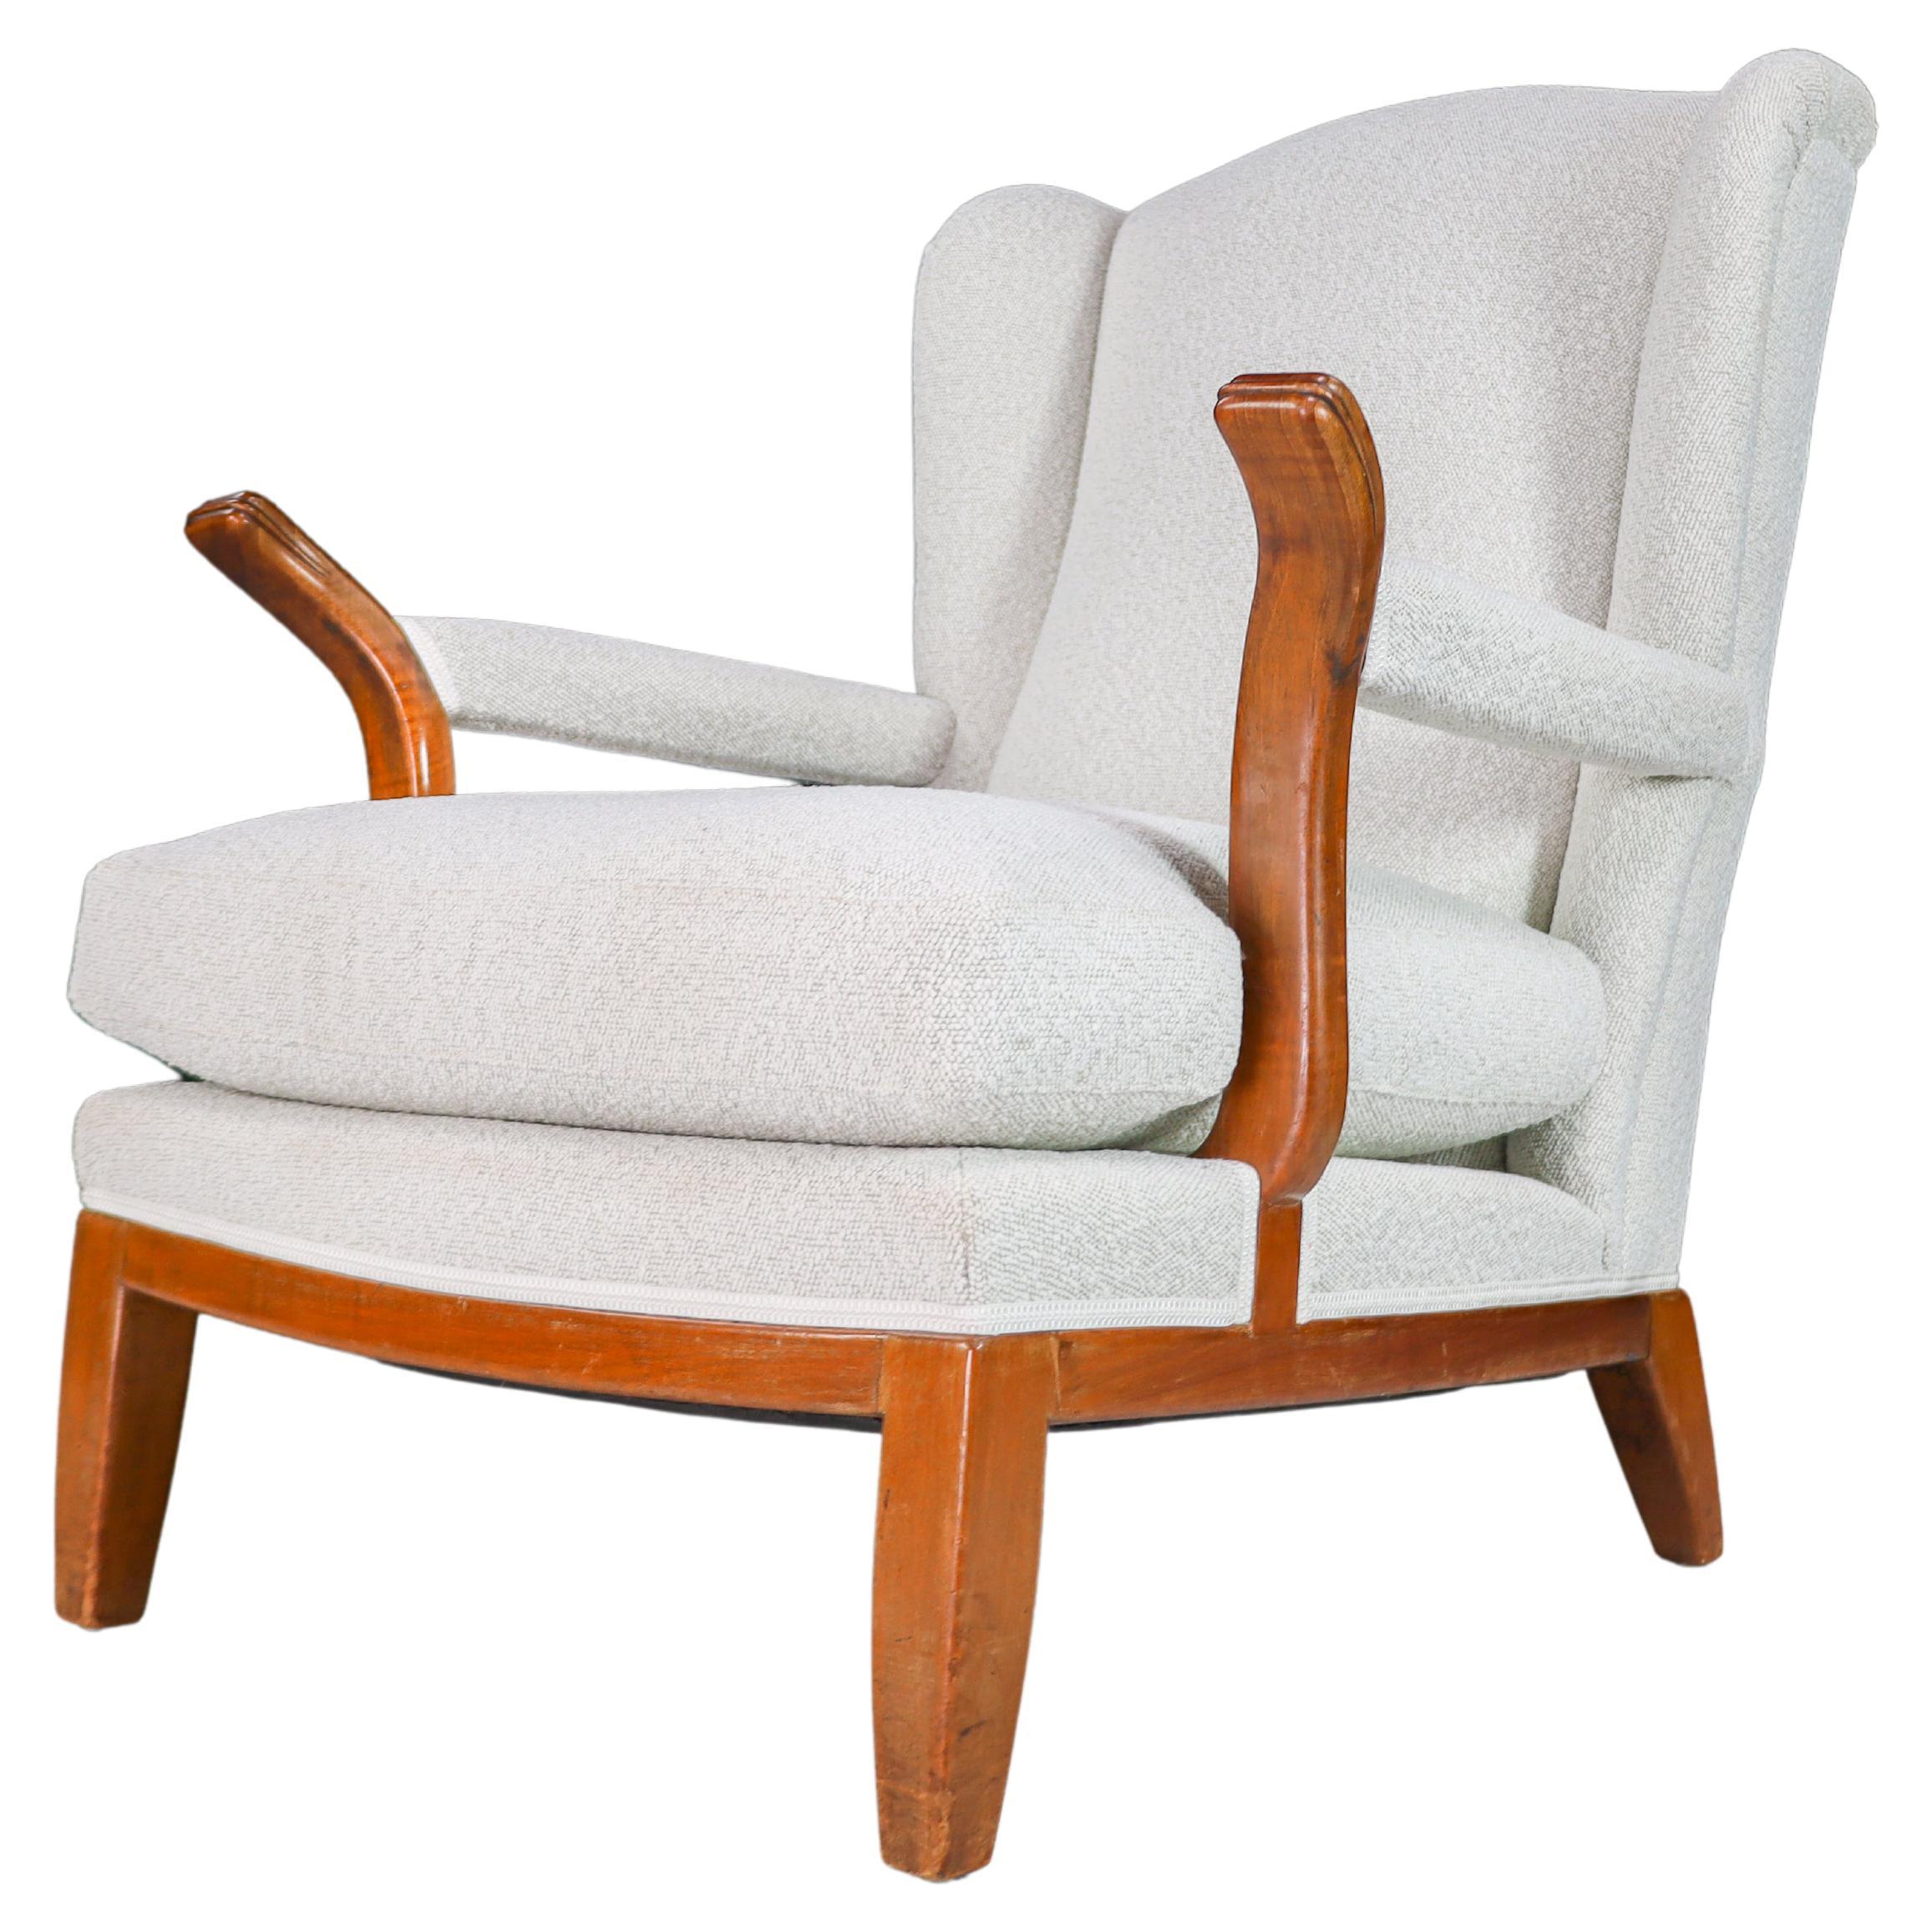 Large Wingback Chair in Walnut and New Bouclé Fabric, France, 1930s For Sale